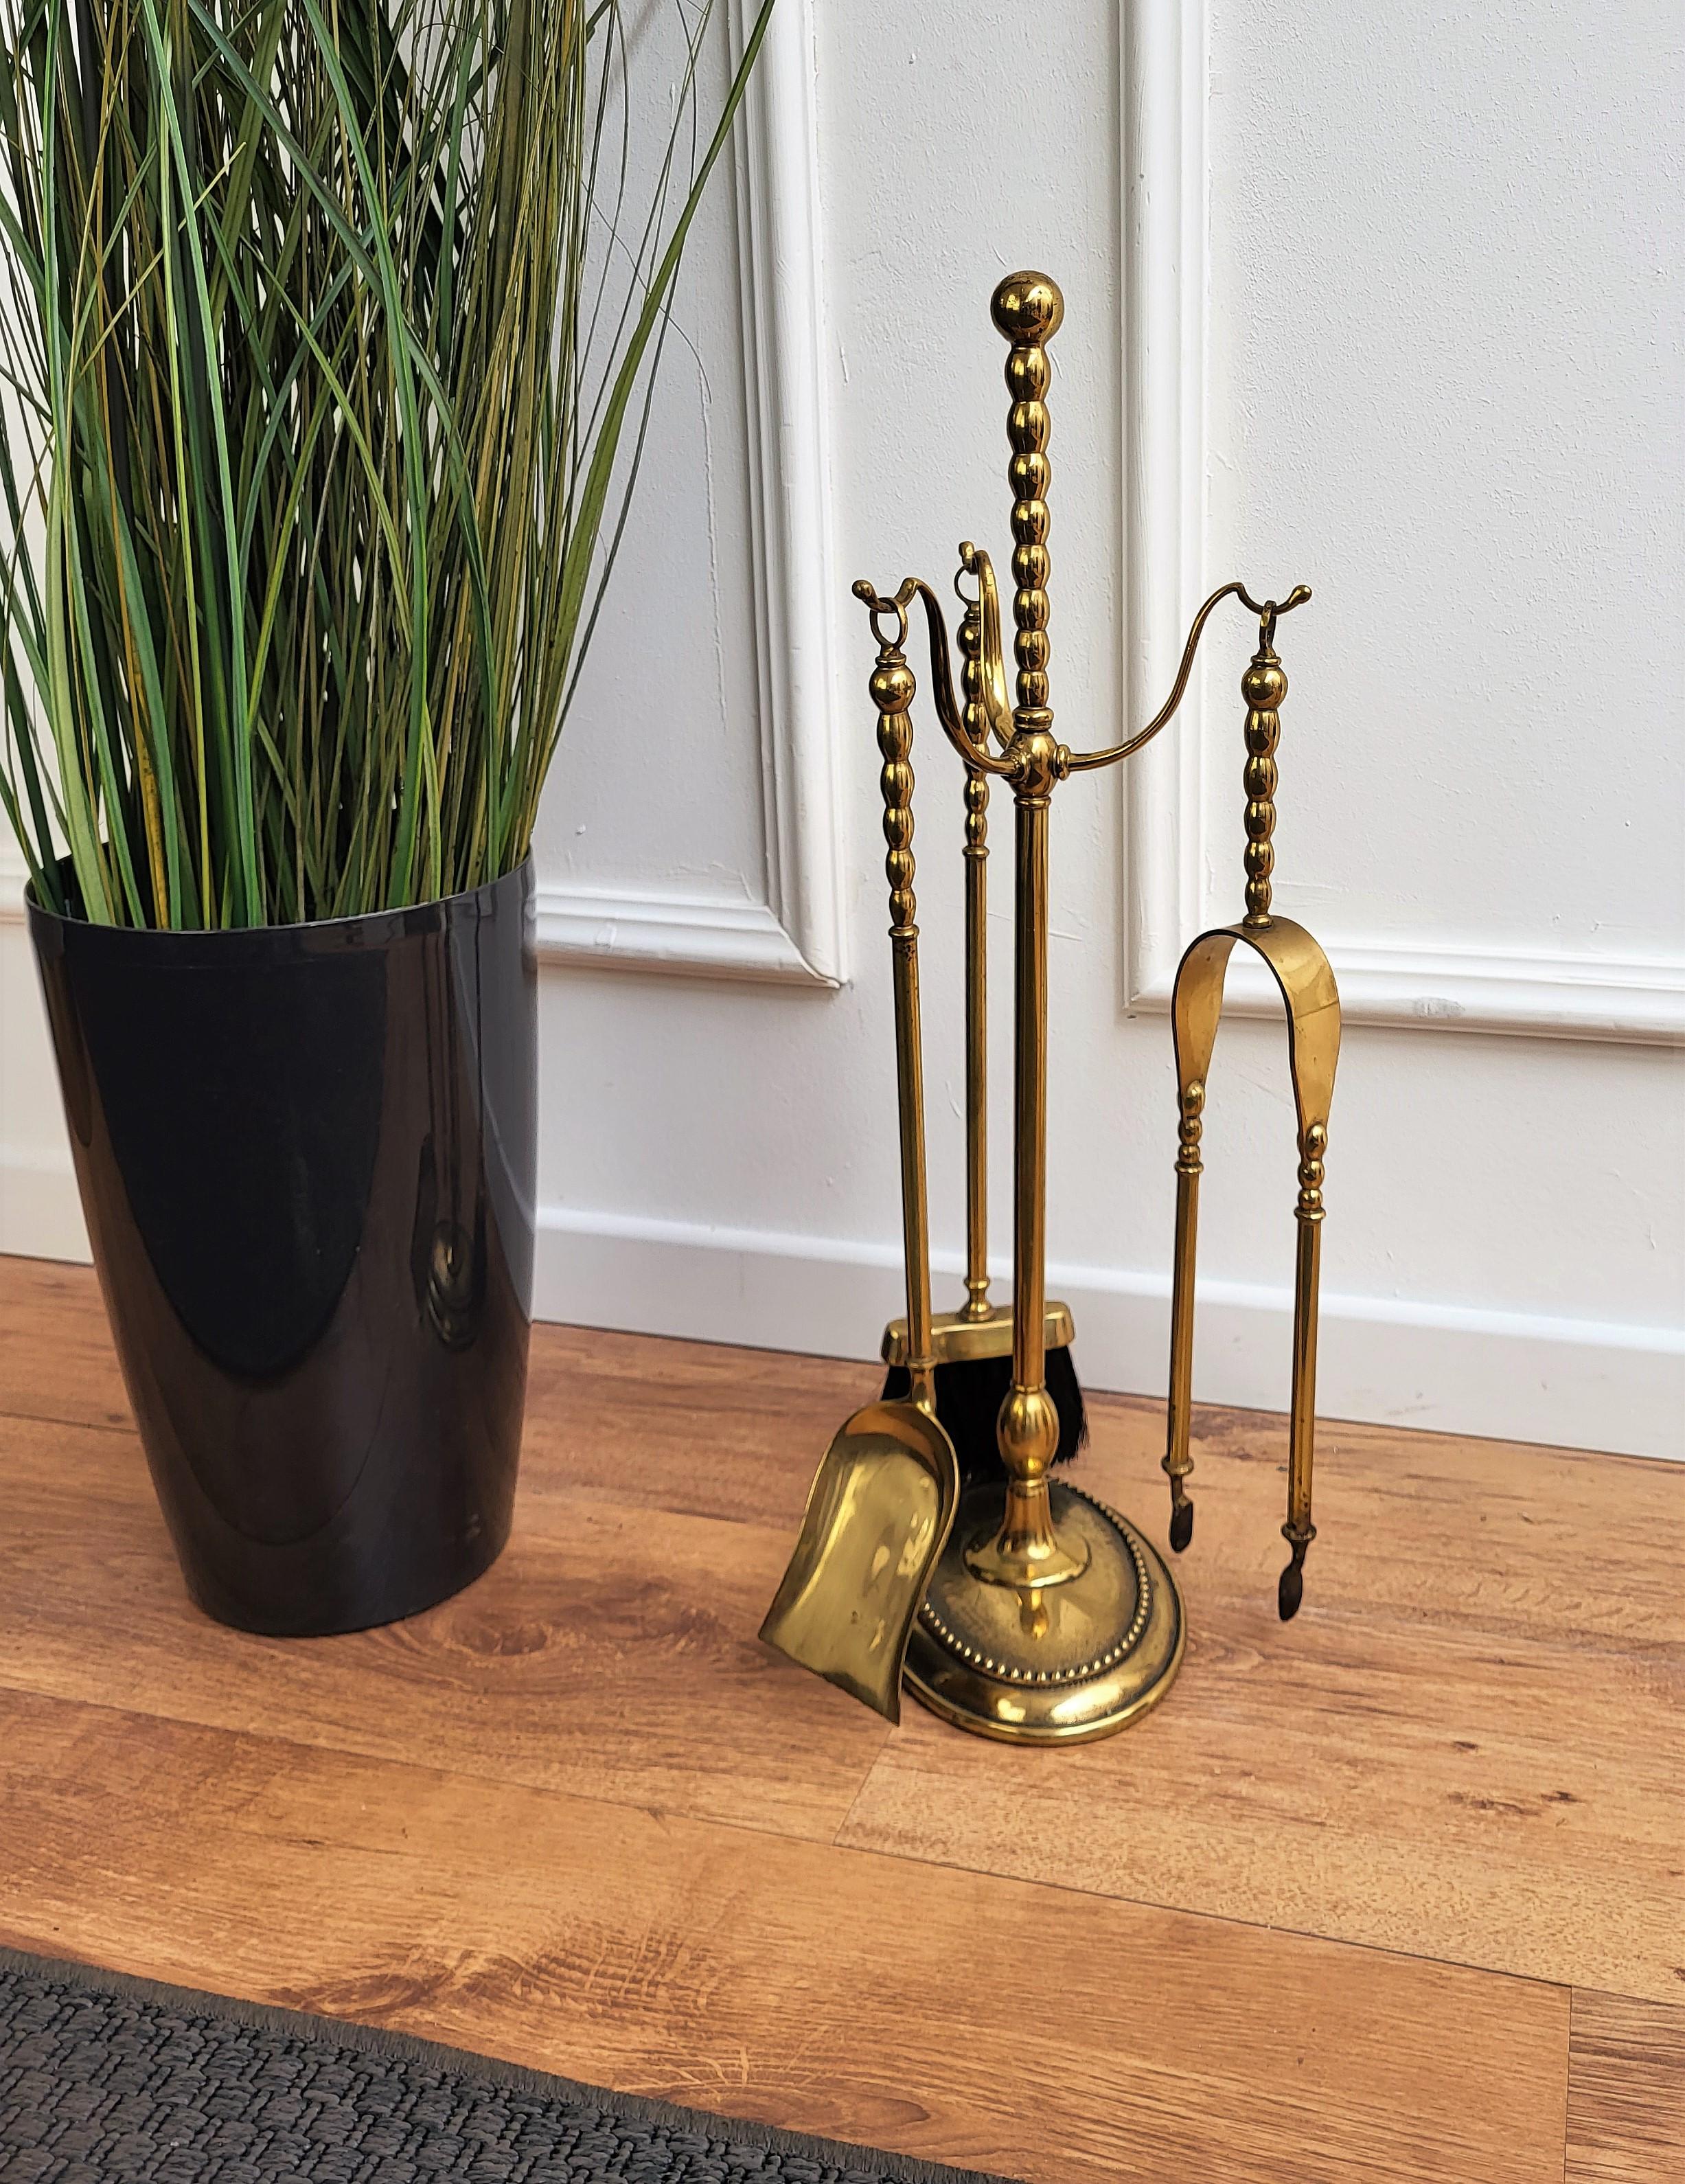 Beautiful Italian brass three-piece fire tool set with stand. The set consists of a poker, a shovel and a pair of tongs, each with an ornate handle such as the stand. 

